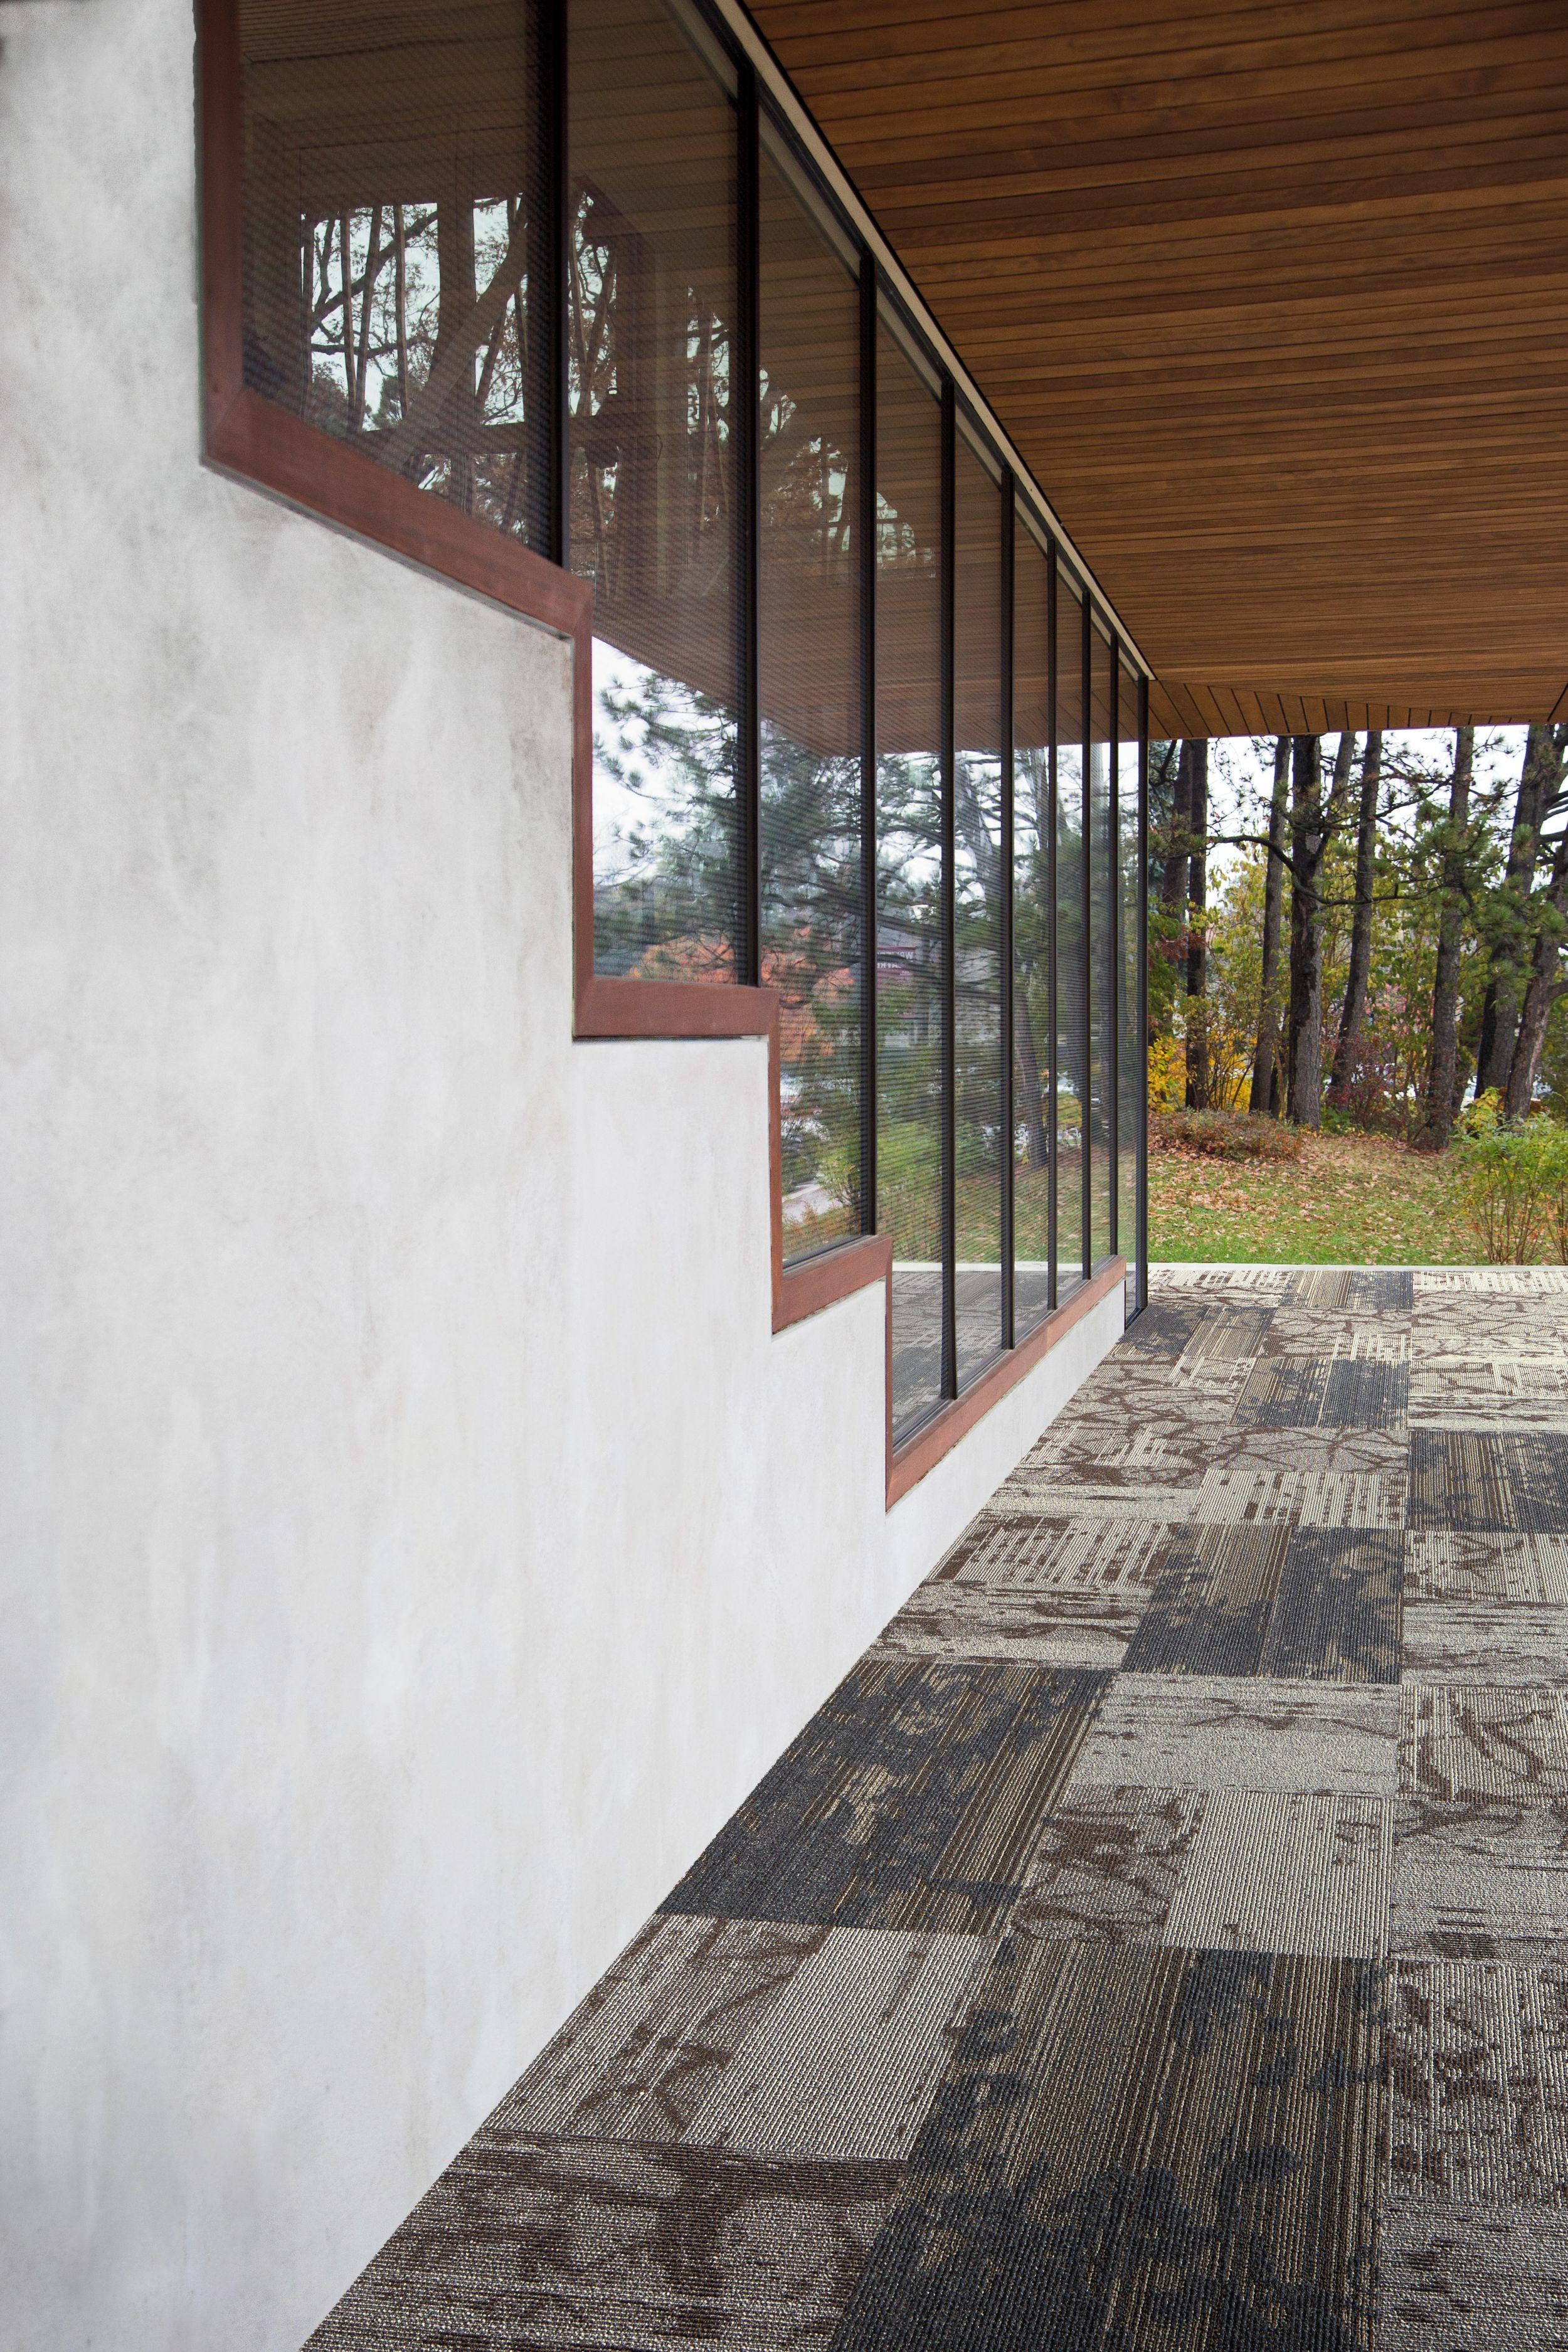 Interface Glazing and Ground plank carpet tile shown for inspiration in outdoor setting image number 14